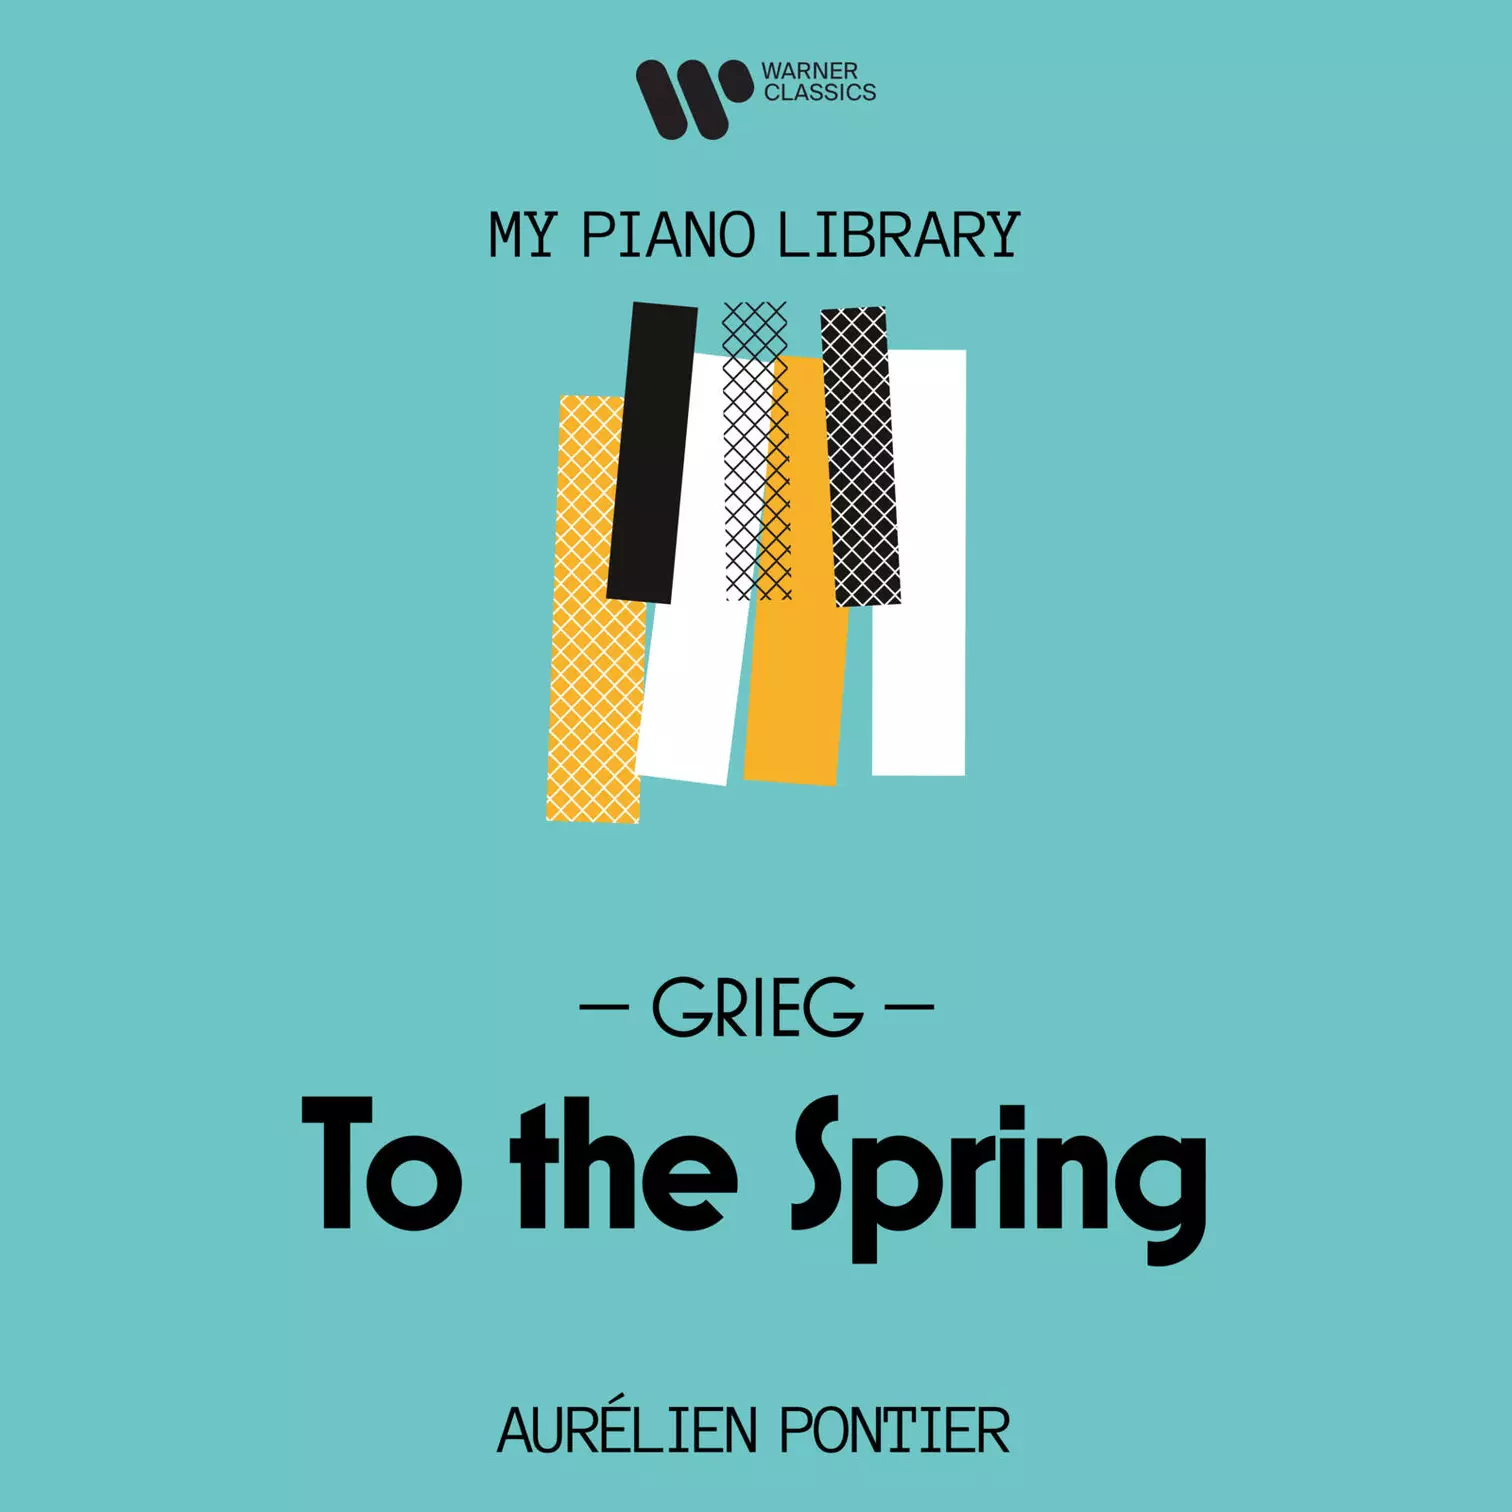 Grieg: To the Spring